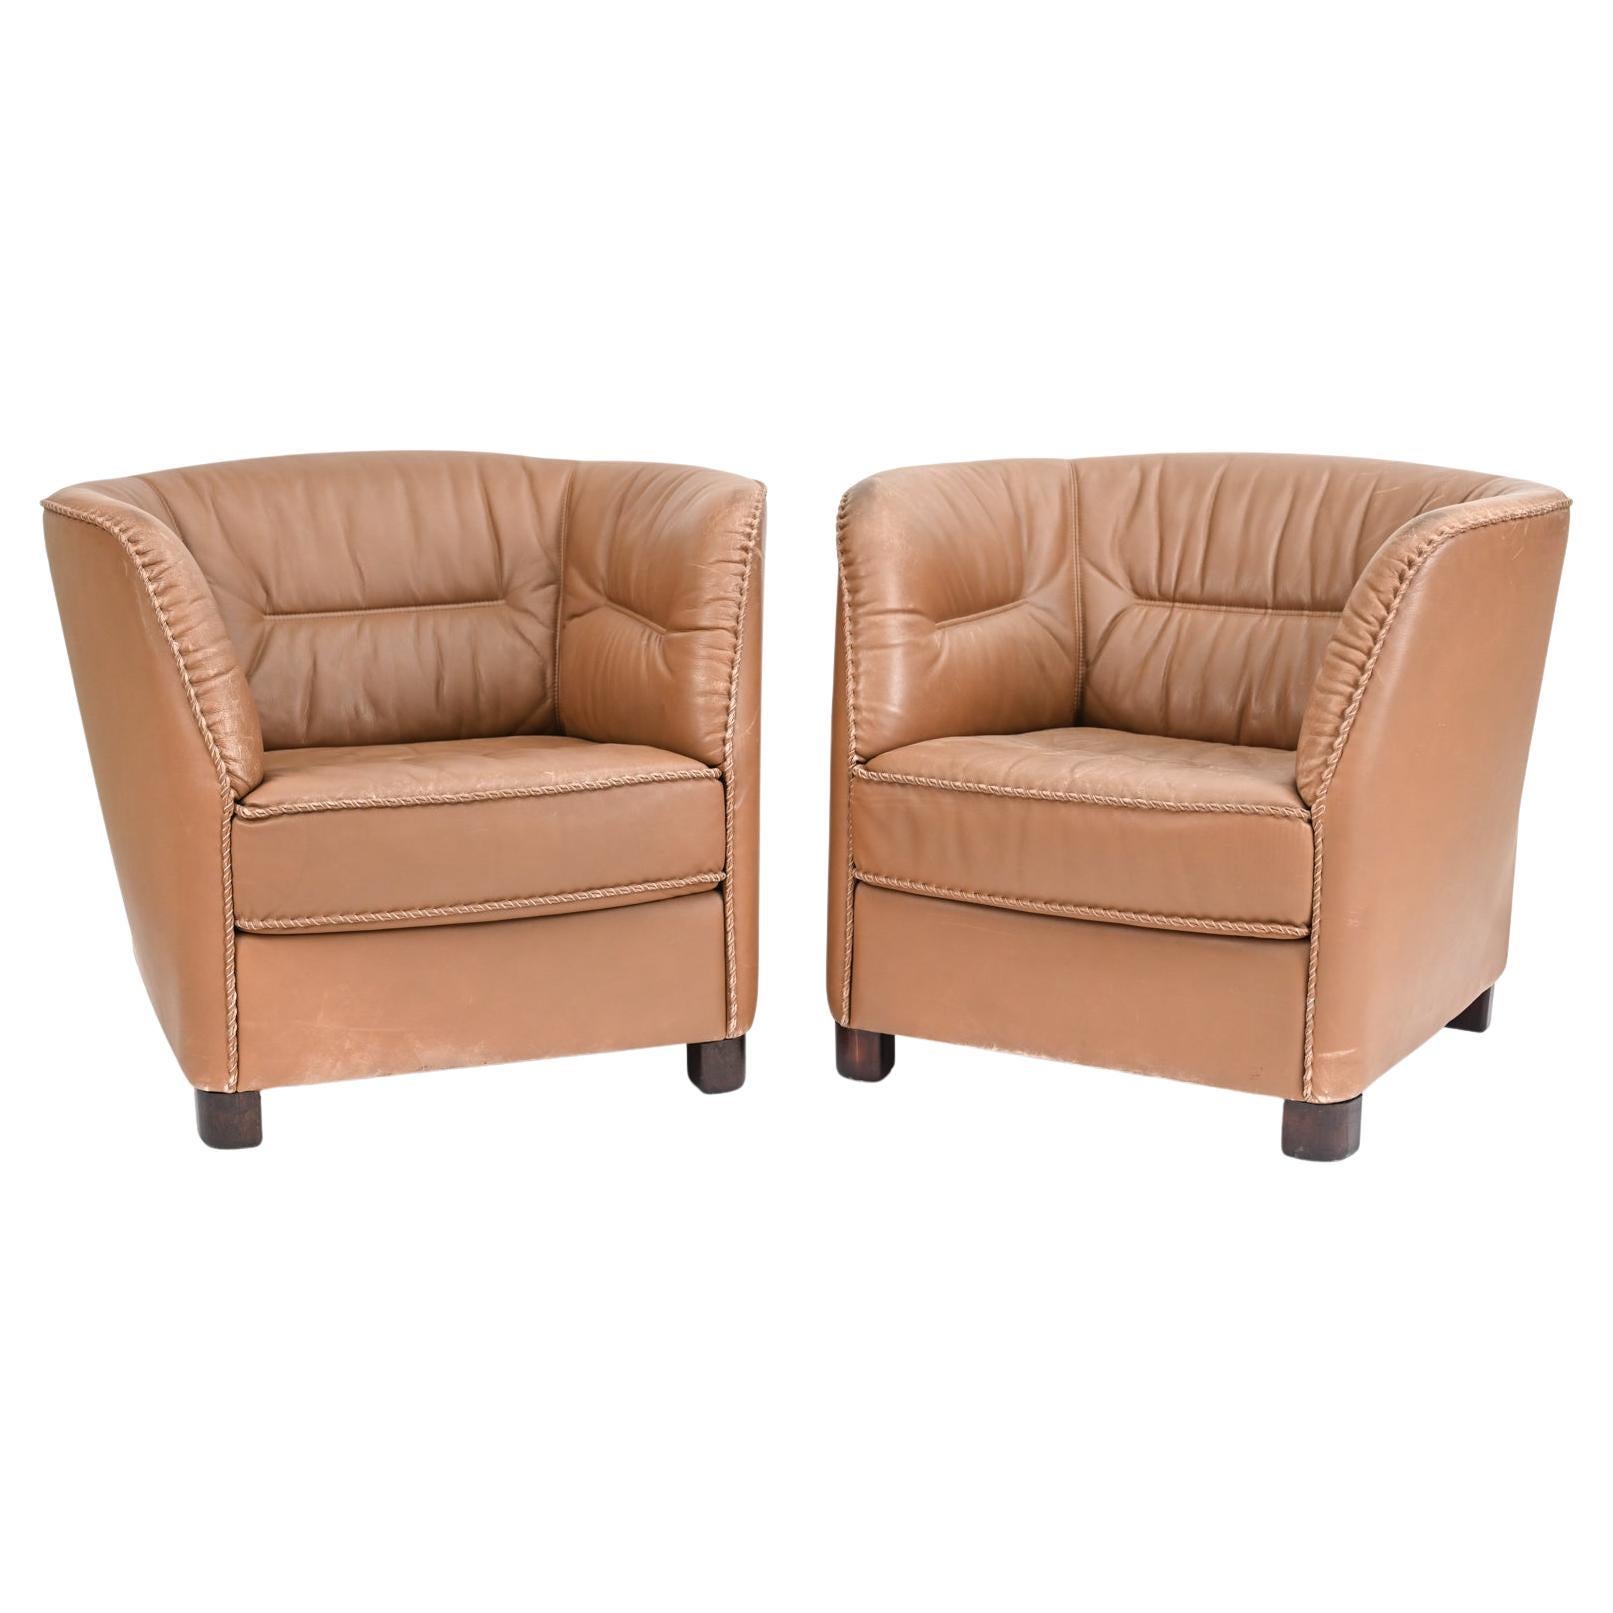 Pair of Danish Modern Leather Whipstitched Lounge Chairs by Berg Furniture